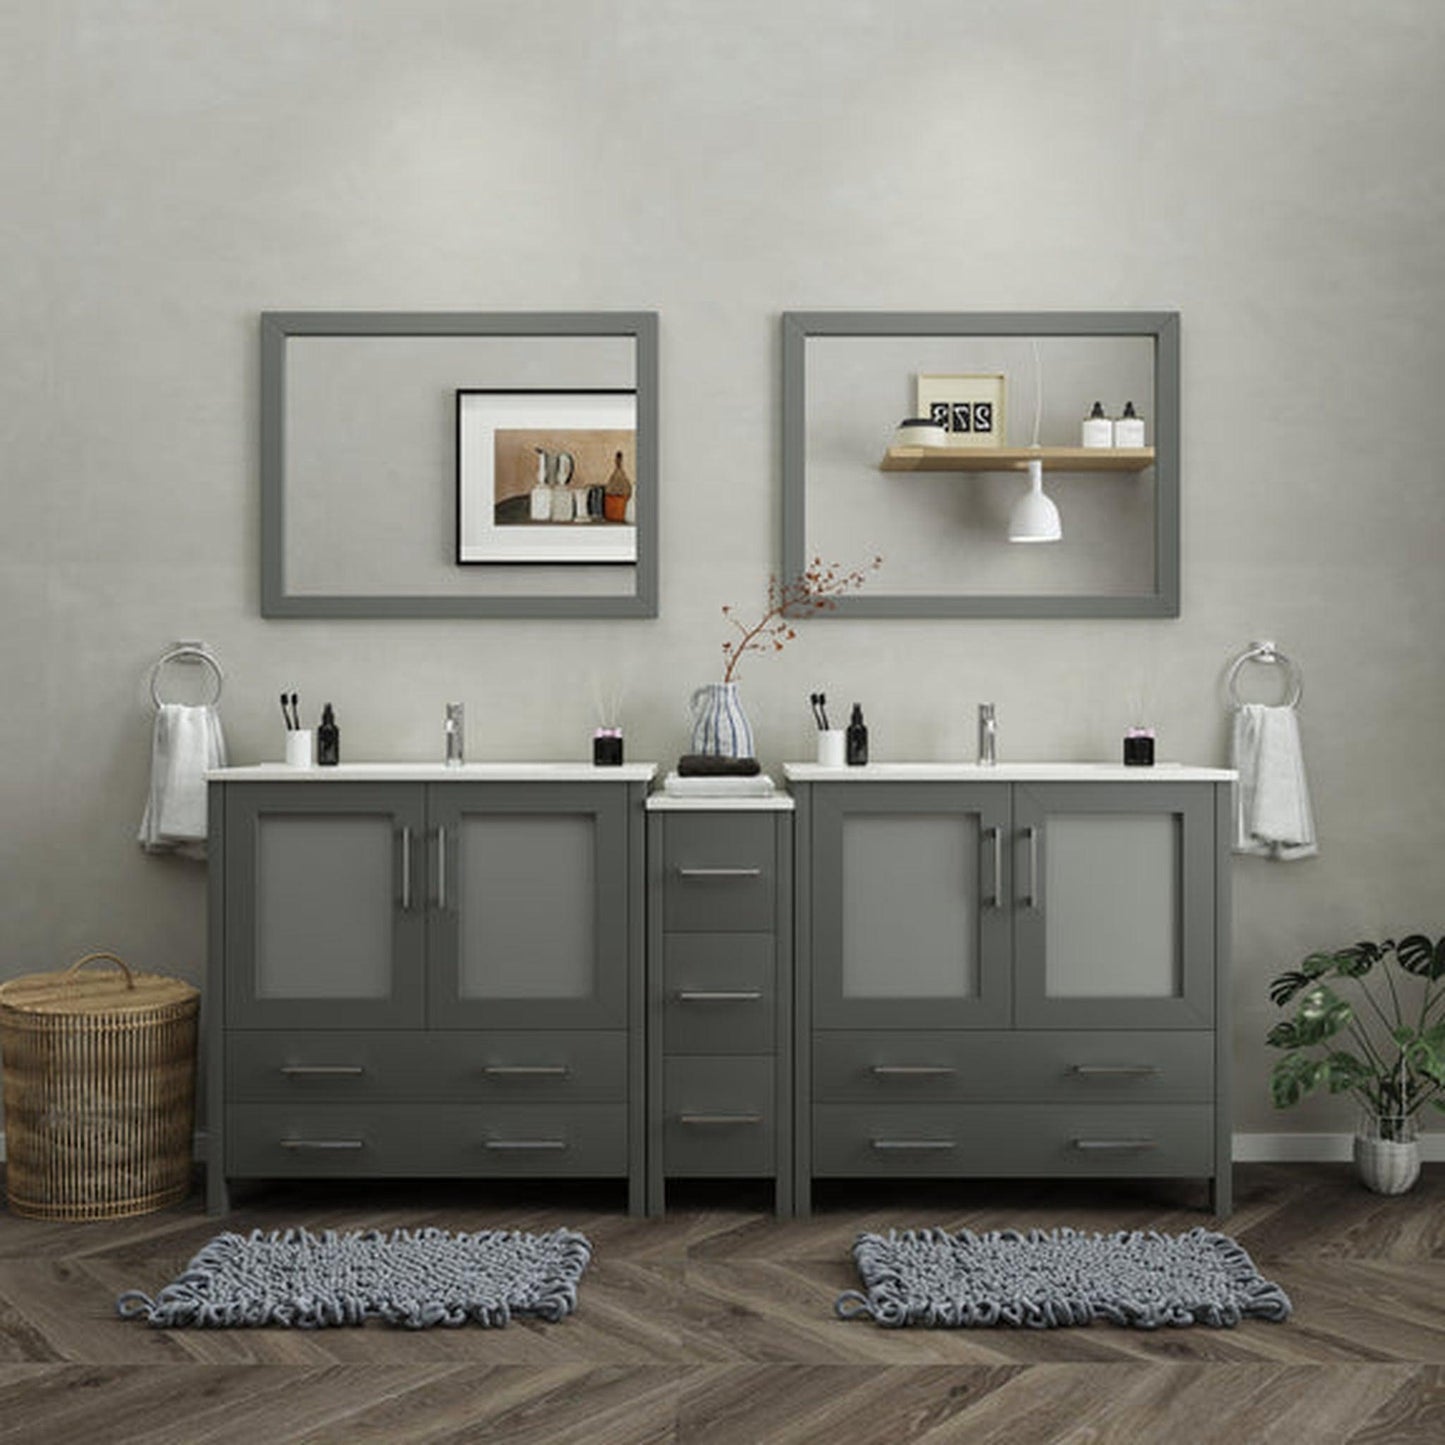 Vanity Art Brescia 84" Double Gray Freestanding Modern Bathroom Vanity Set With Integrated Ceramic Sink, 1 Side Cabinet and 2 Mirrors